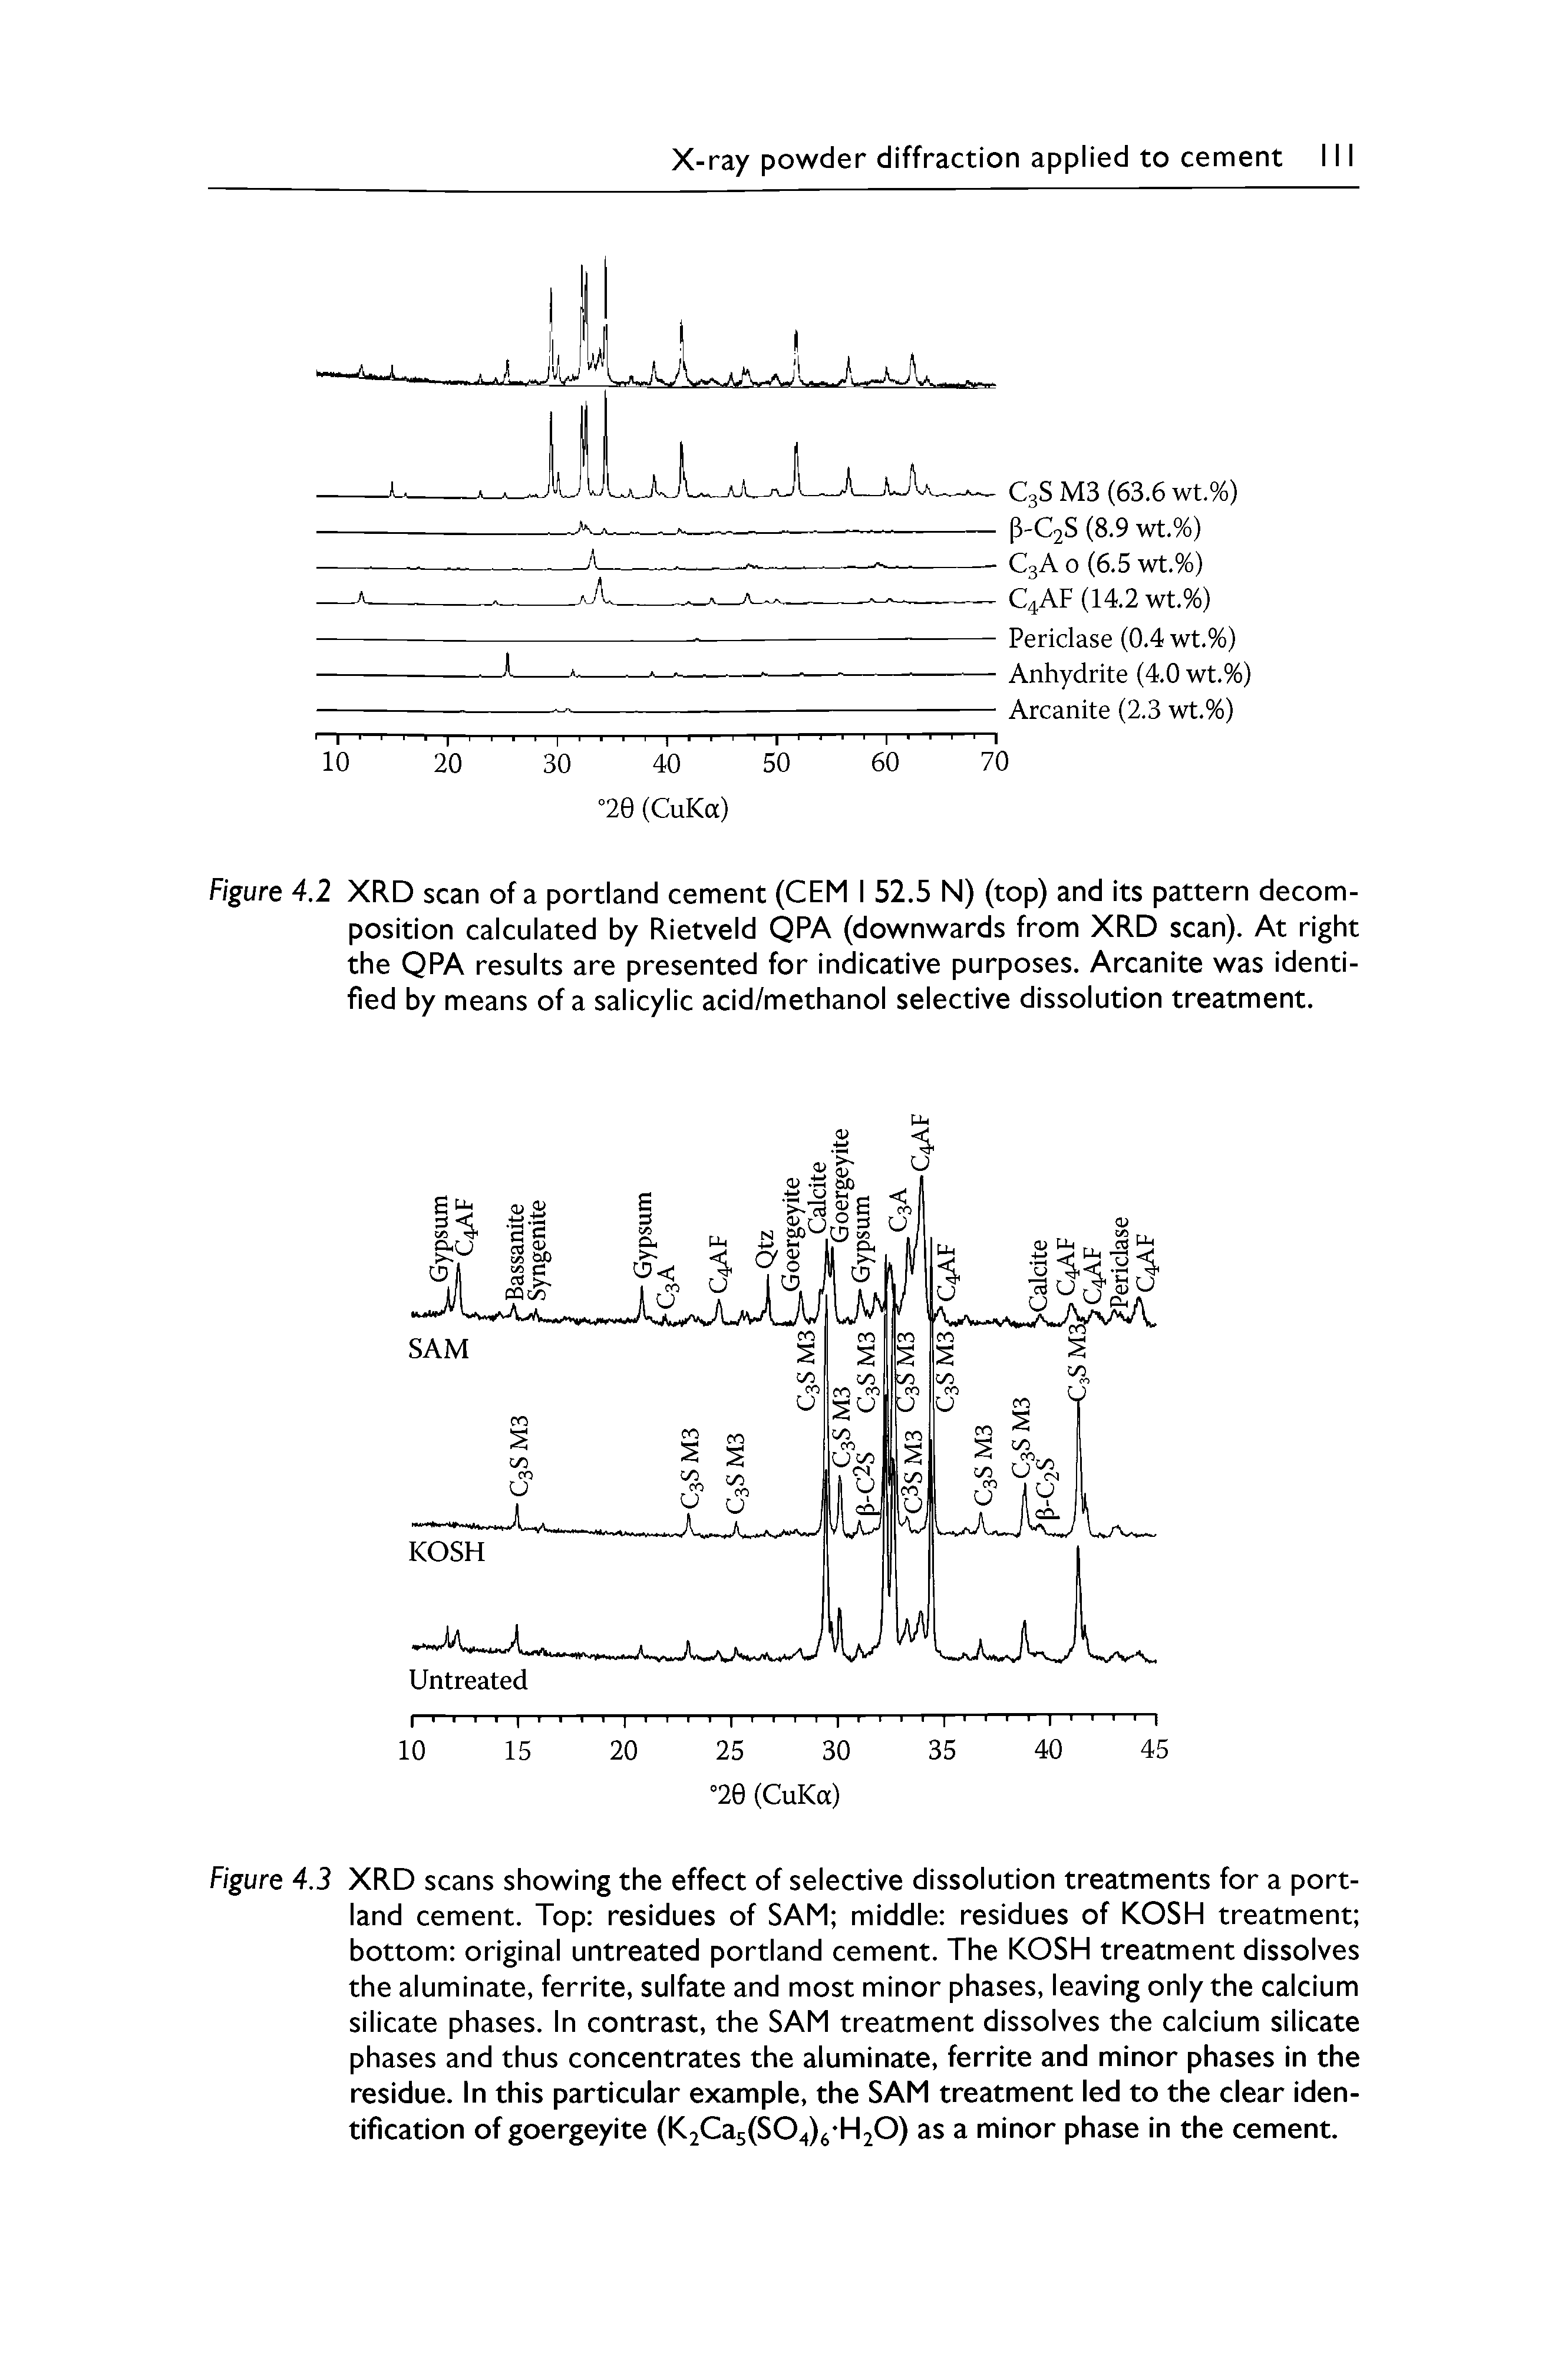 Figure 4.3 XRD scans showing the effect of selective dissolution treatments for a port-land cement. Top residues of SAM middle residues of KOSH treatment bottom original untreated portland cement. The KOSH treatment dissolves the aluminate, ferrite, sulfate and most minor phases, leaving only the calcium silicate phases. In contrast, the SAM treatment dissolves the calcium silicate phases and thus concentrates the aluminate, ferrite and minor phases in the residue. In this particular example, the SAM treatment led to the clear identification of goergeyite (K2Ca5(S04)6 H20) as a minor phase in the cement.